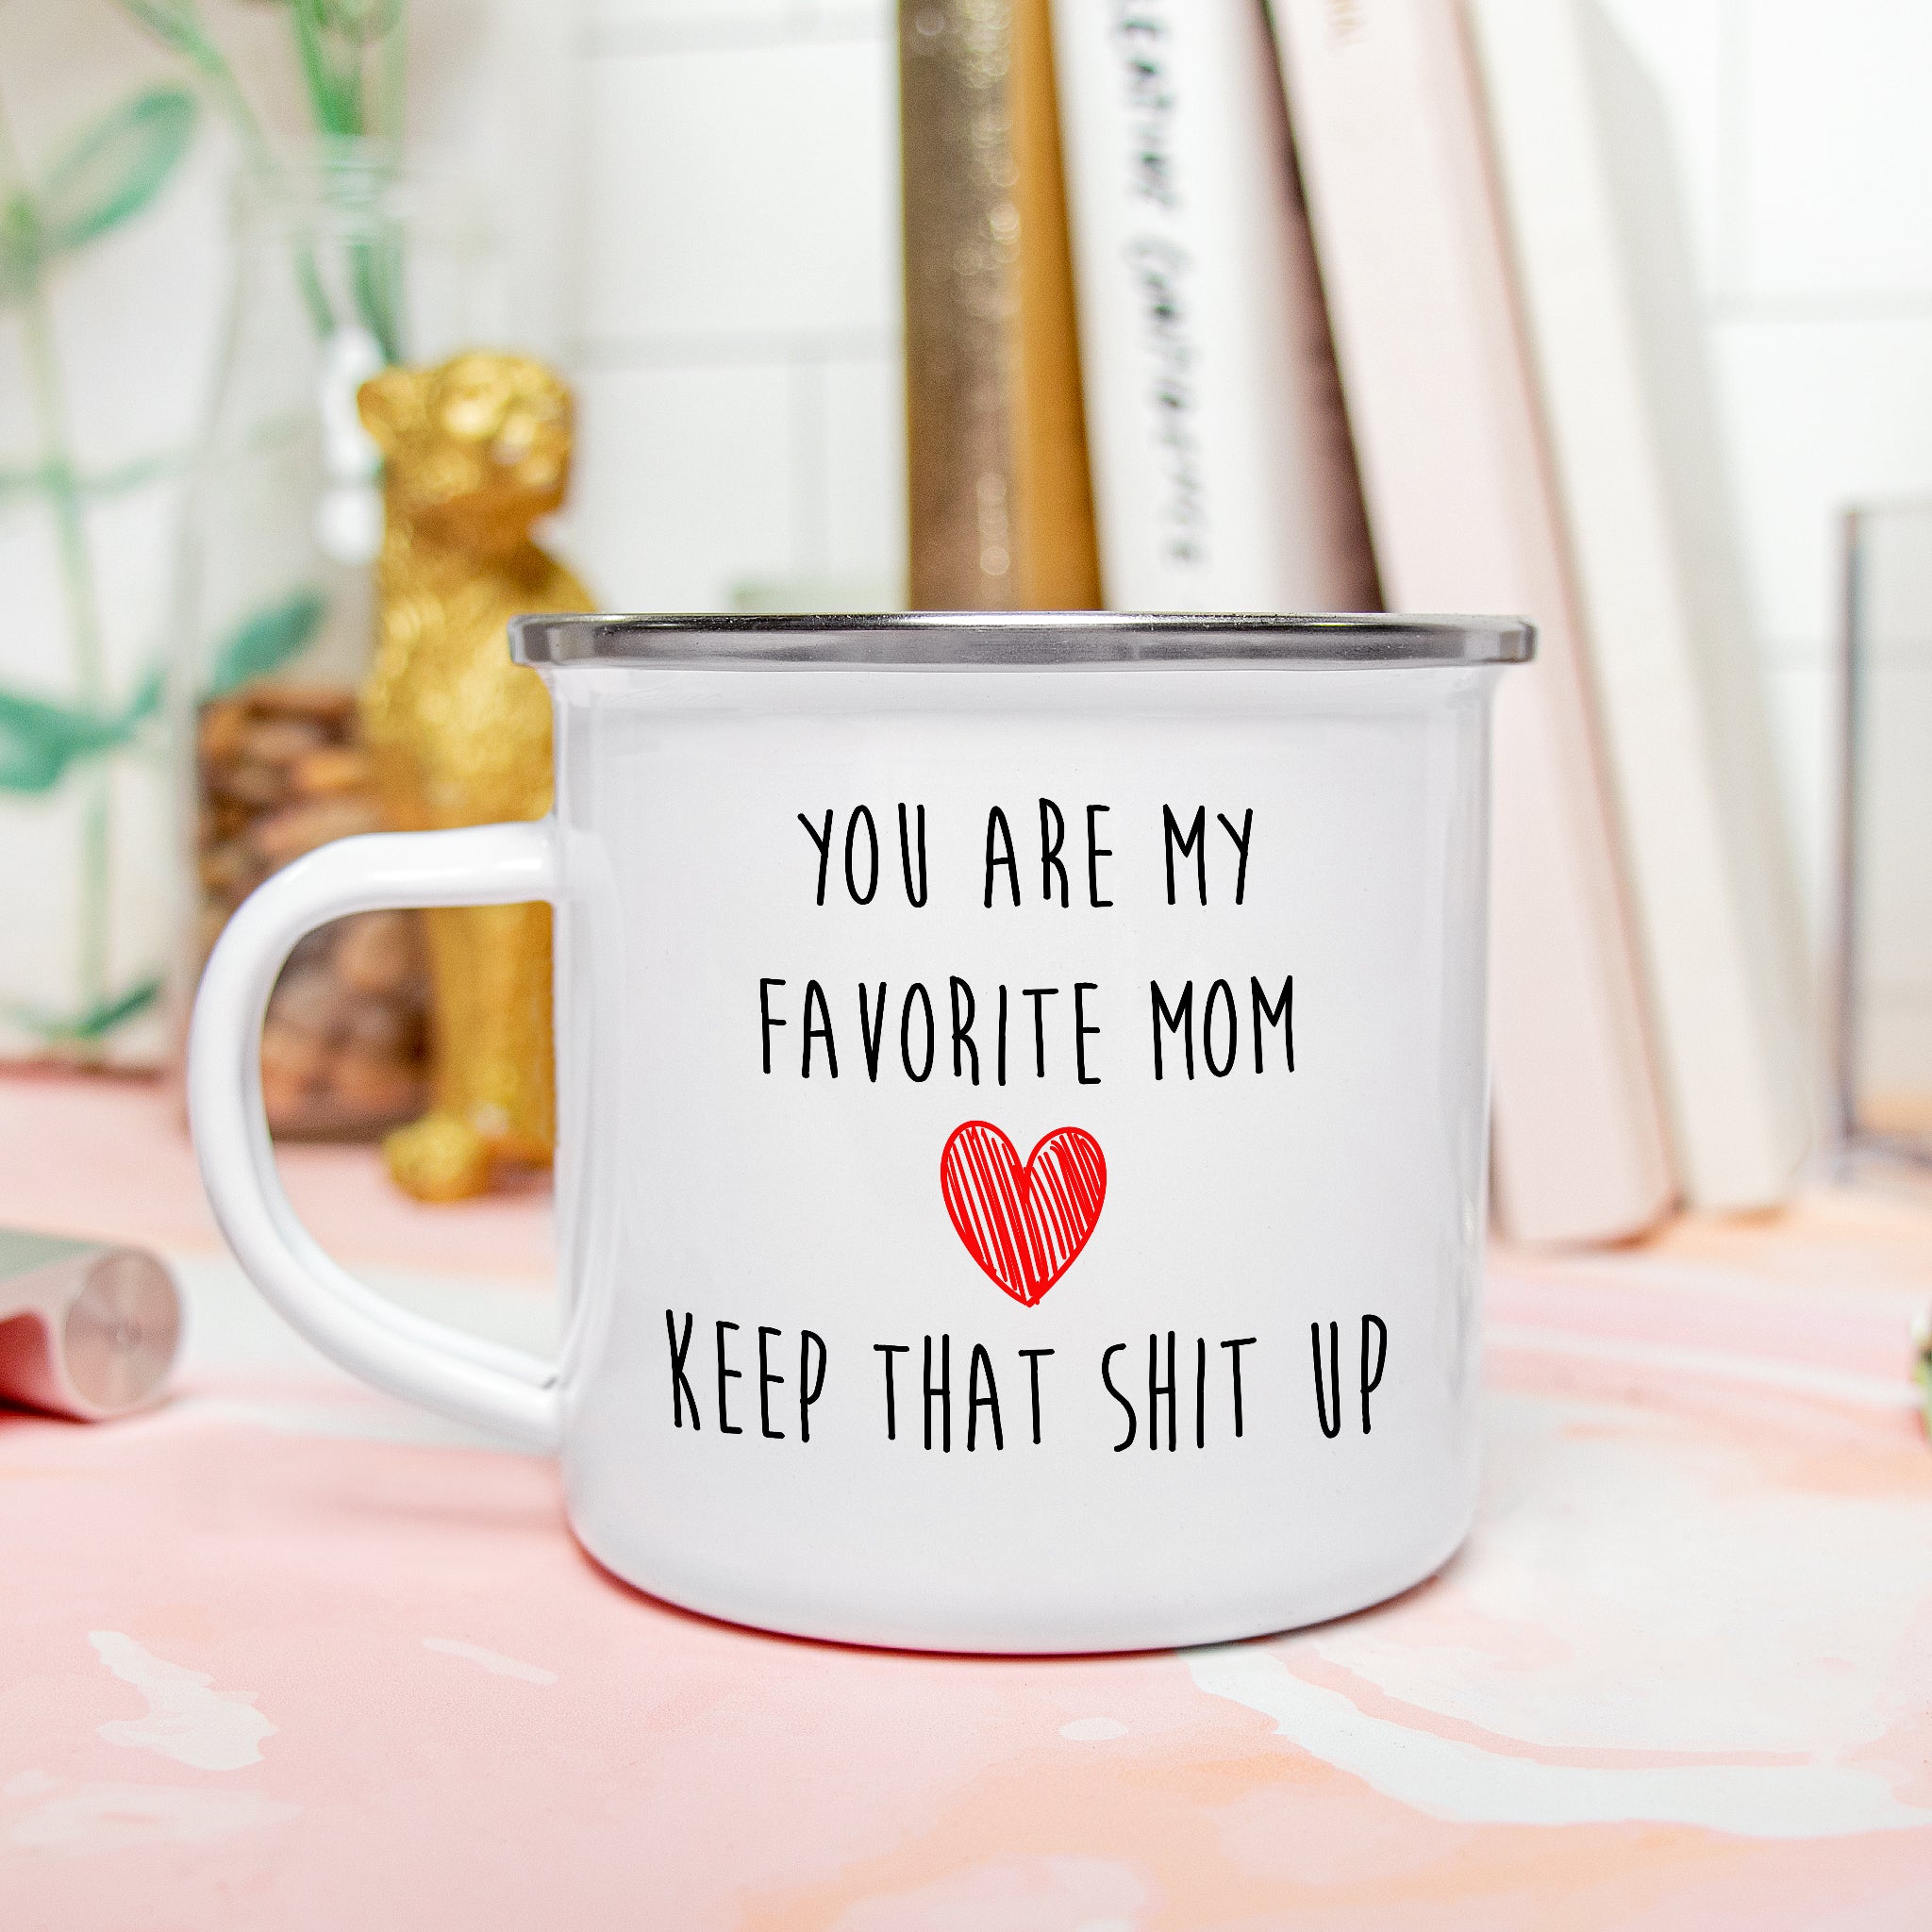 You Are My Favorite Mom - Hilarious Camping Mug For Mother's Day